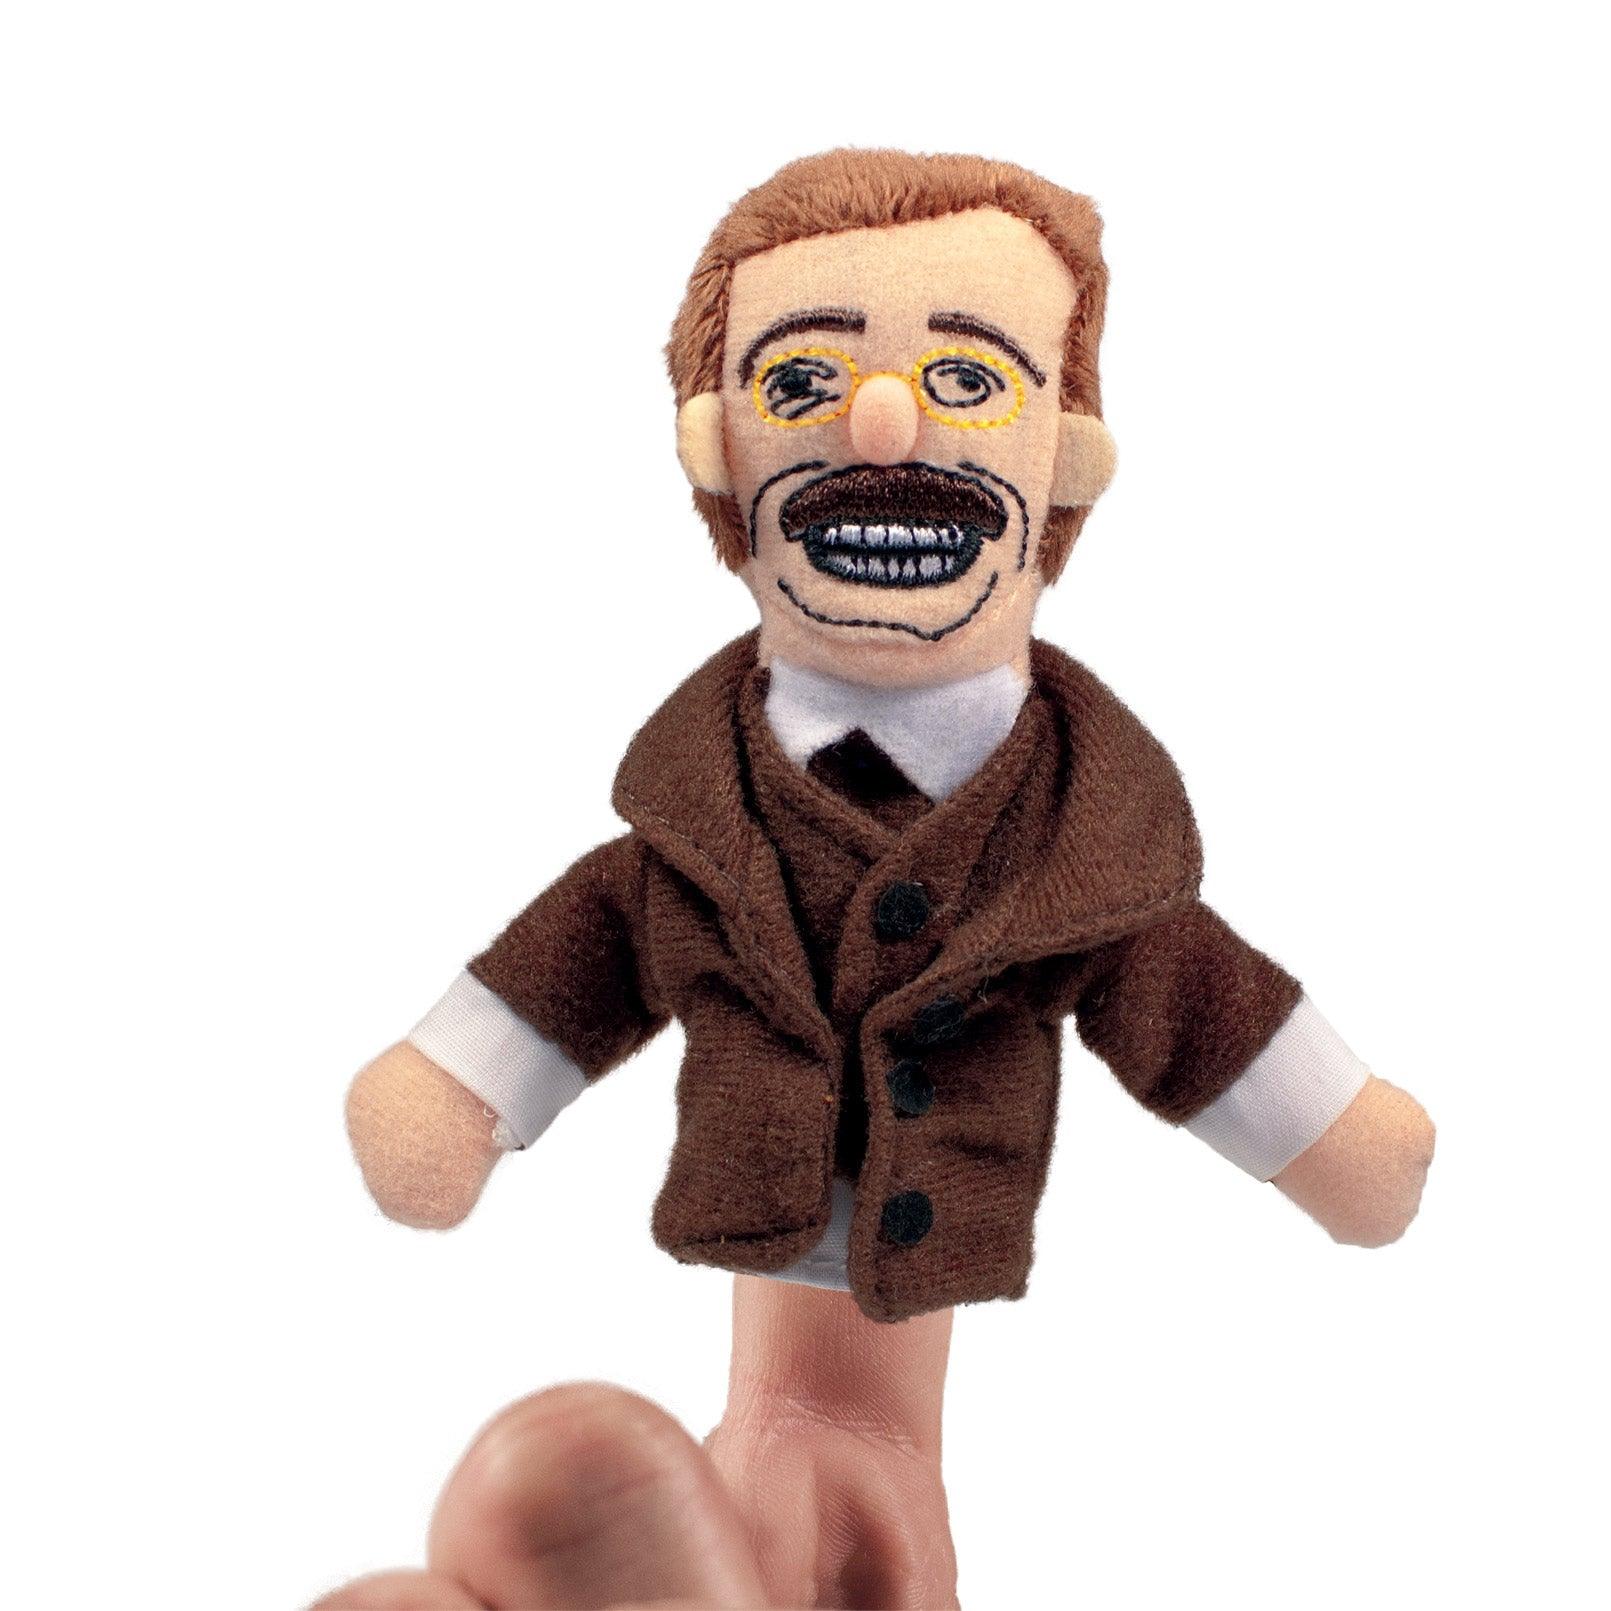 Product photo of Theodore "Teddy" Roosevelt Finger Puppet, a novelty gift manufactured by The Unemployed Philosophers Guild.